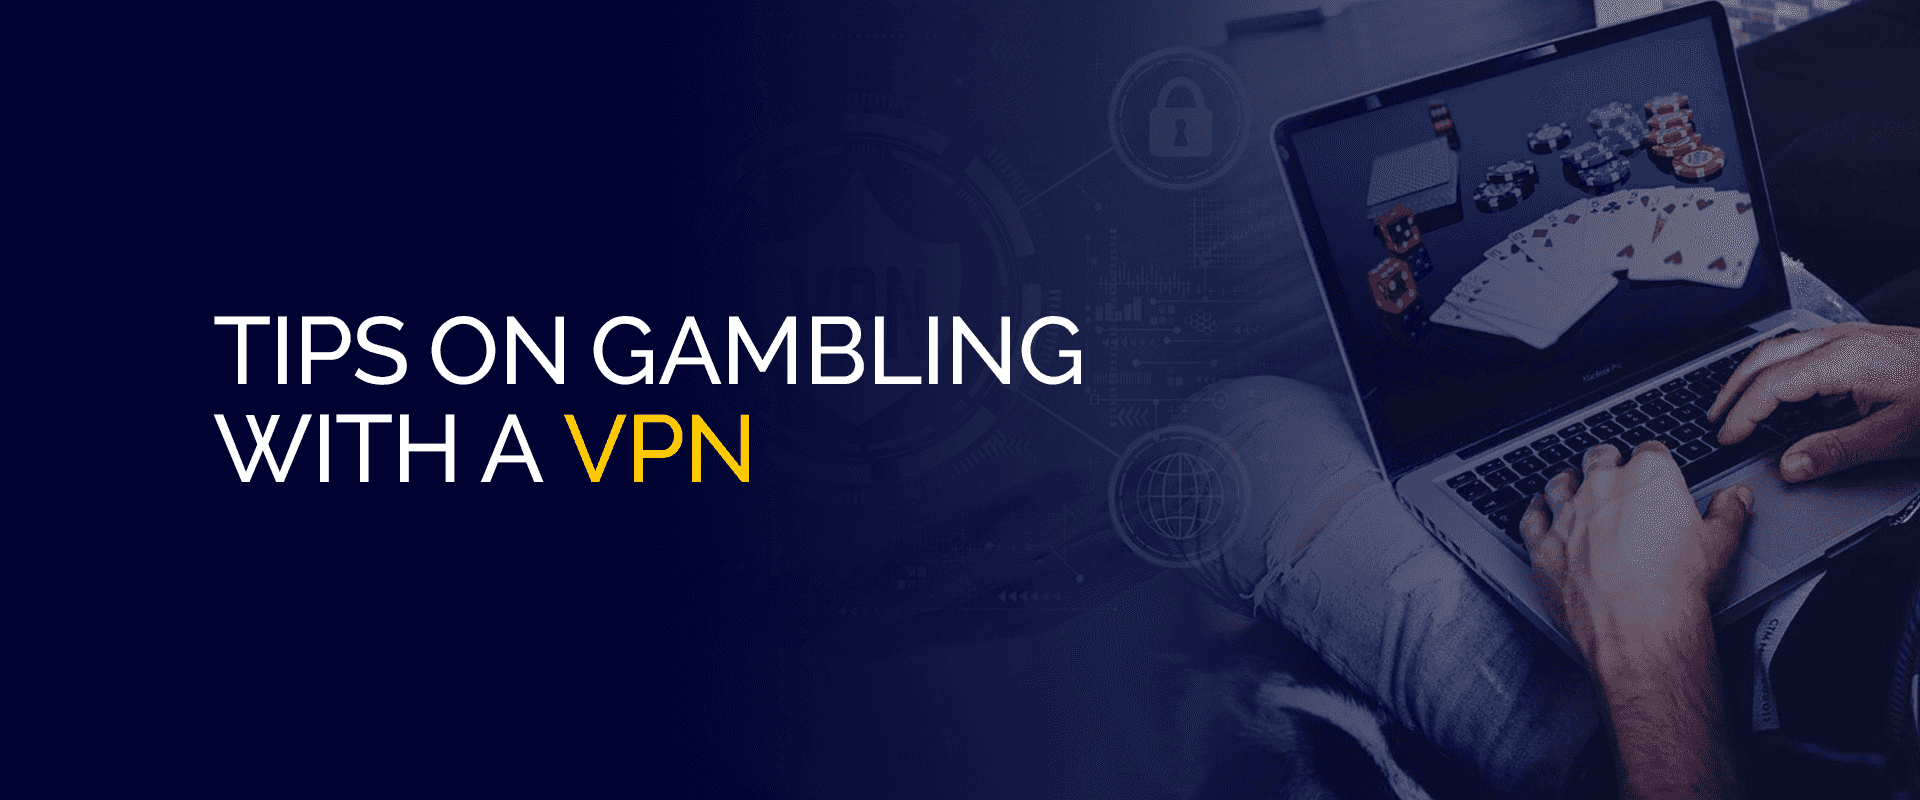 Tips on Gambling with a VPN